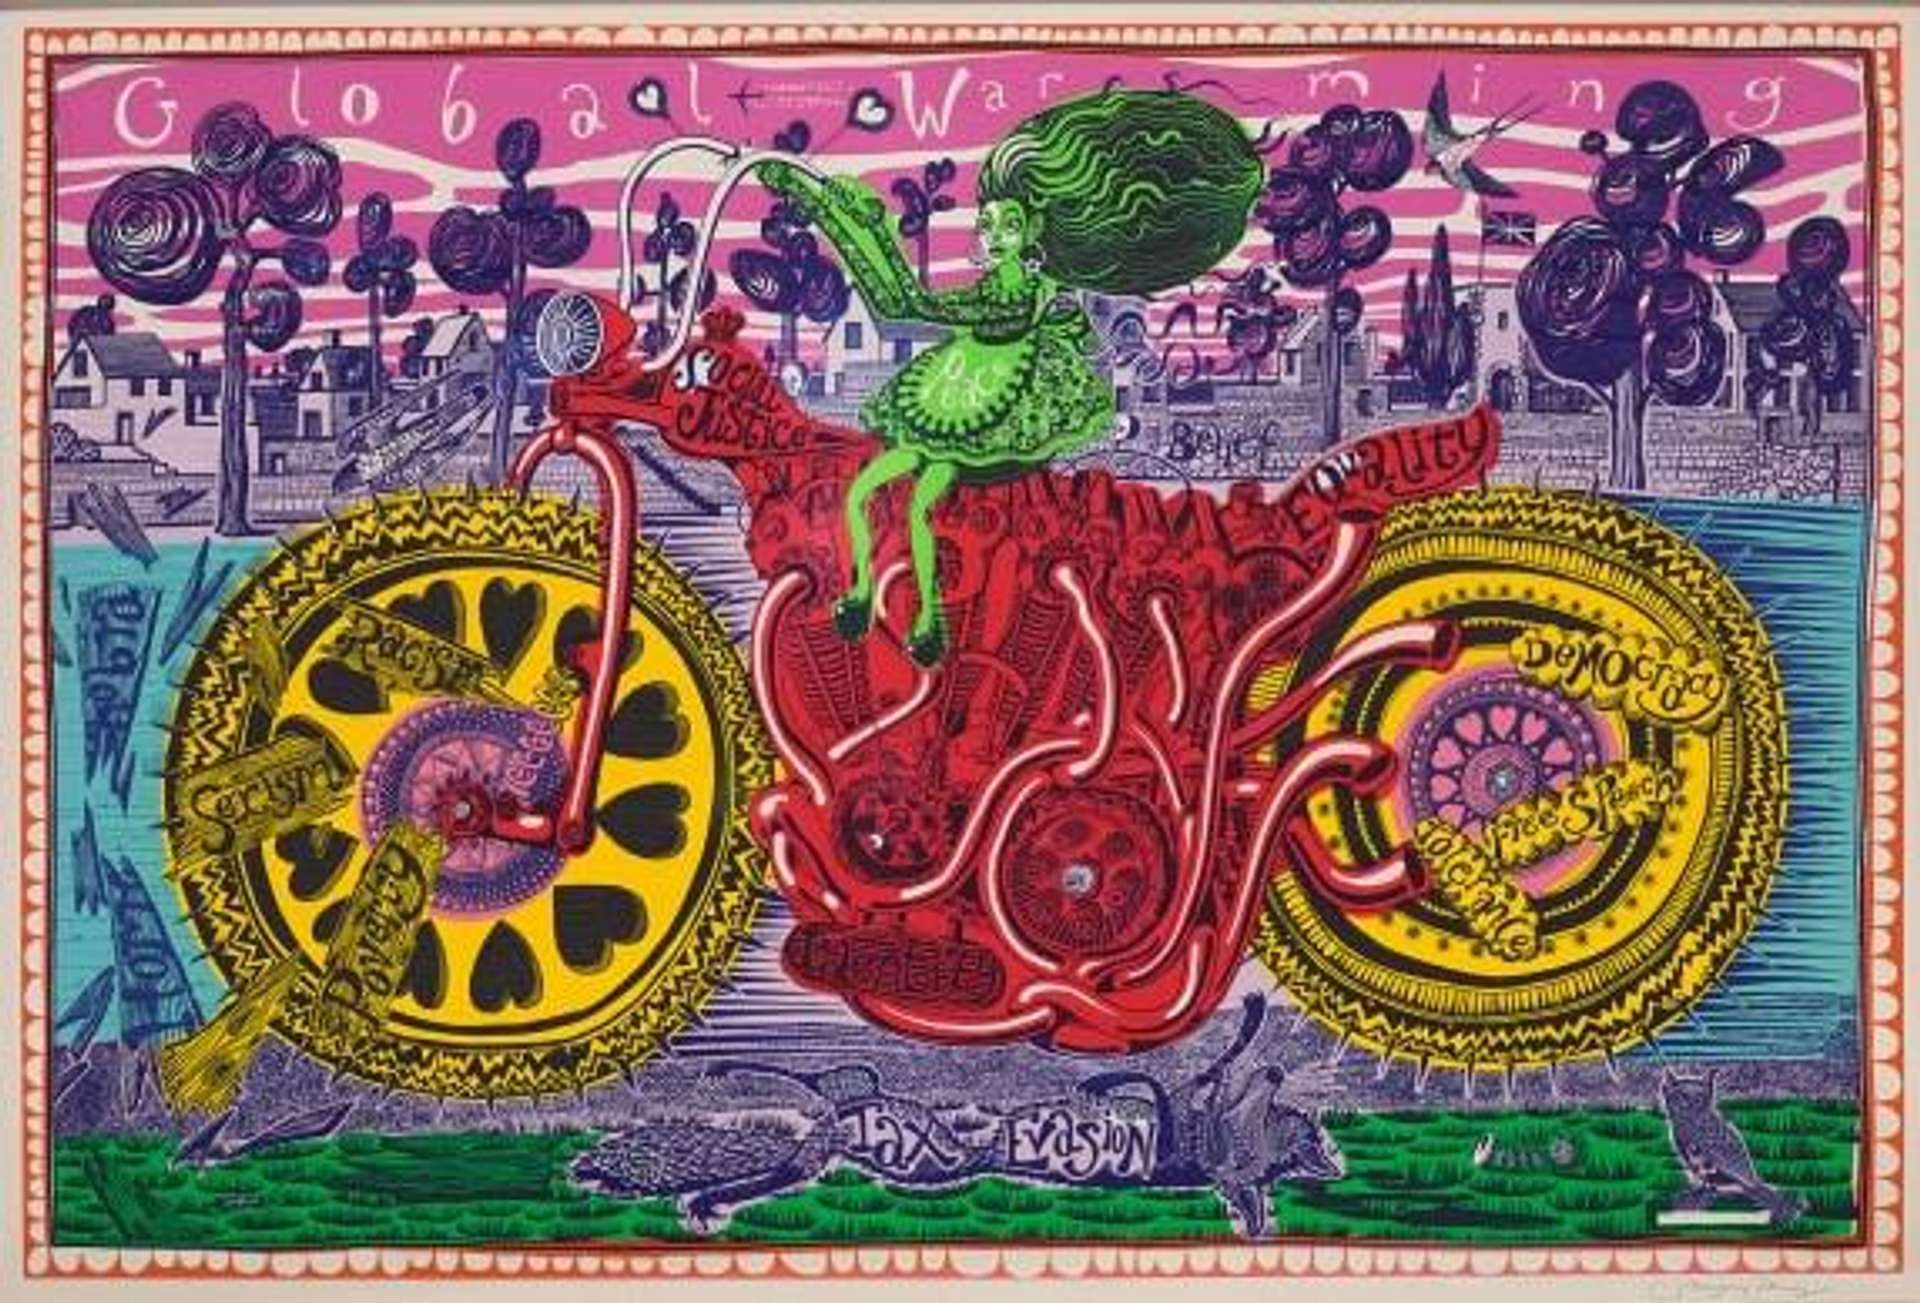 The Social Commentary in Grayson Perry's Work